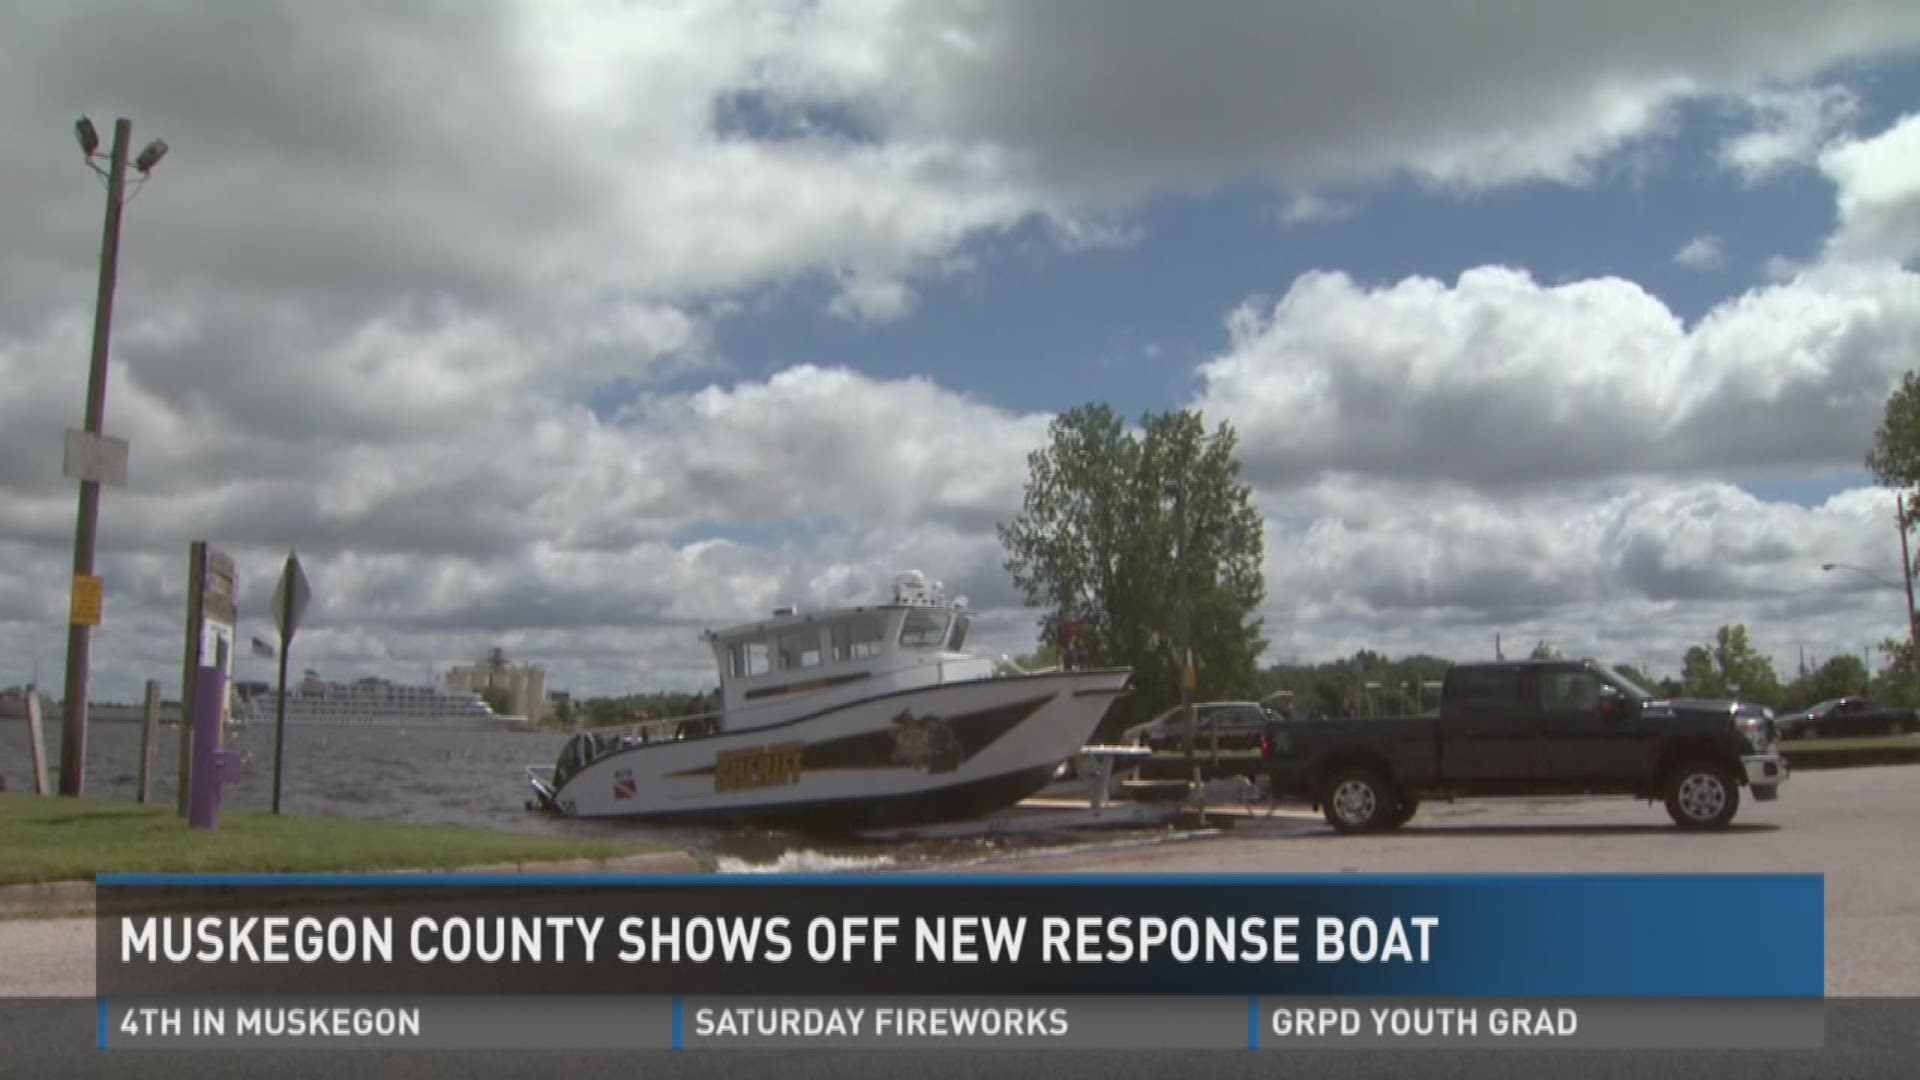 Muskegon county shows off new response boat